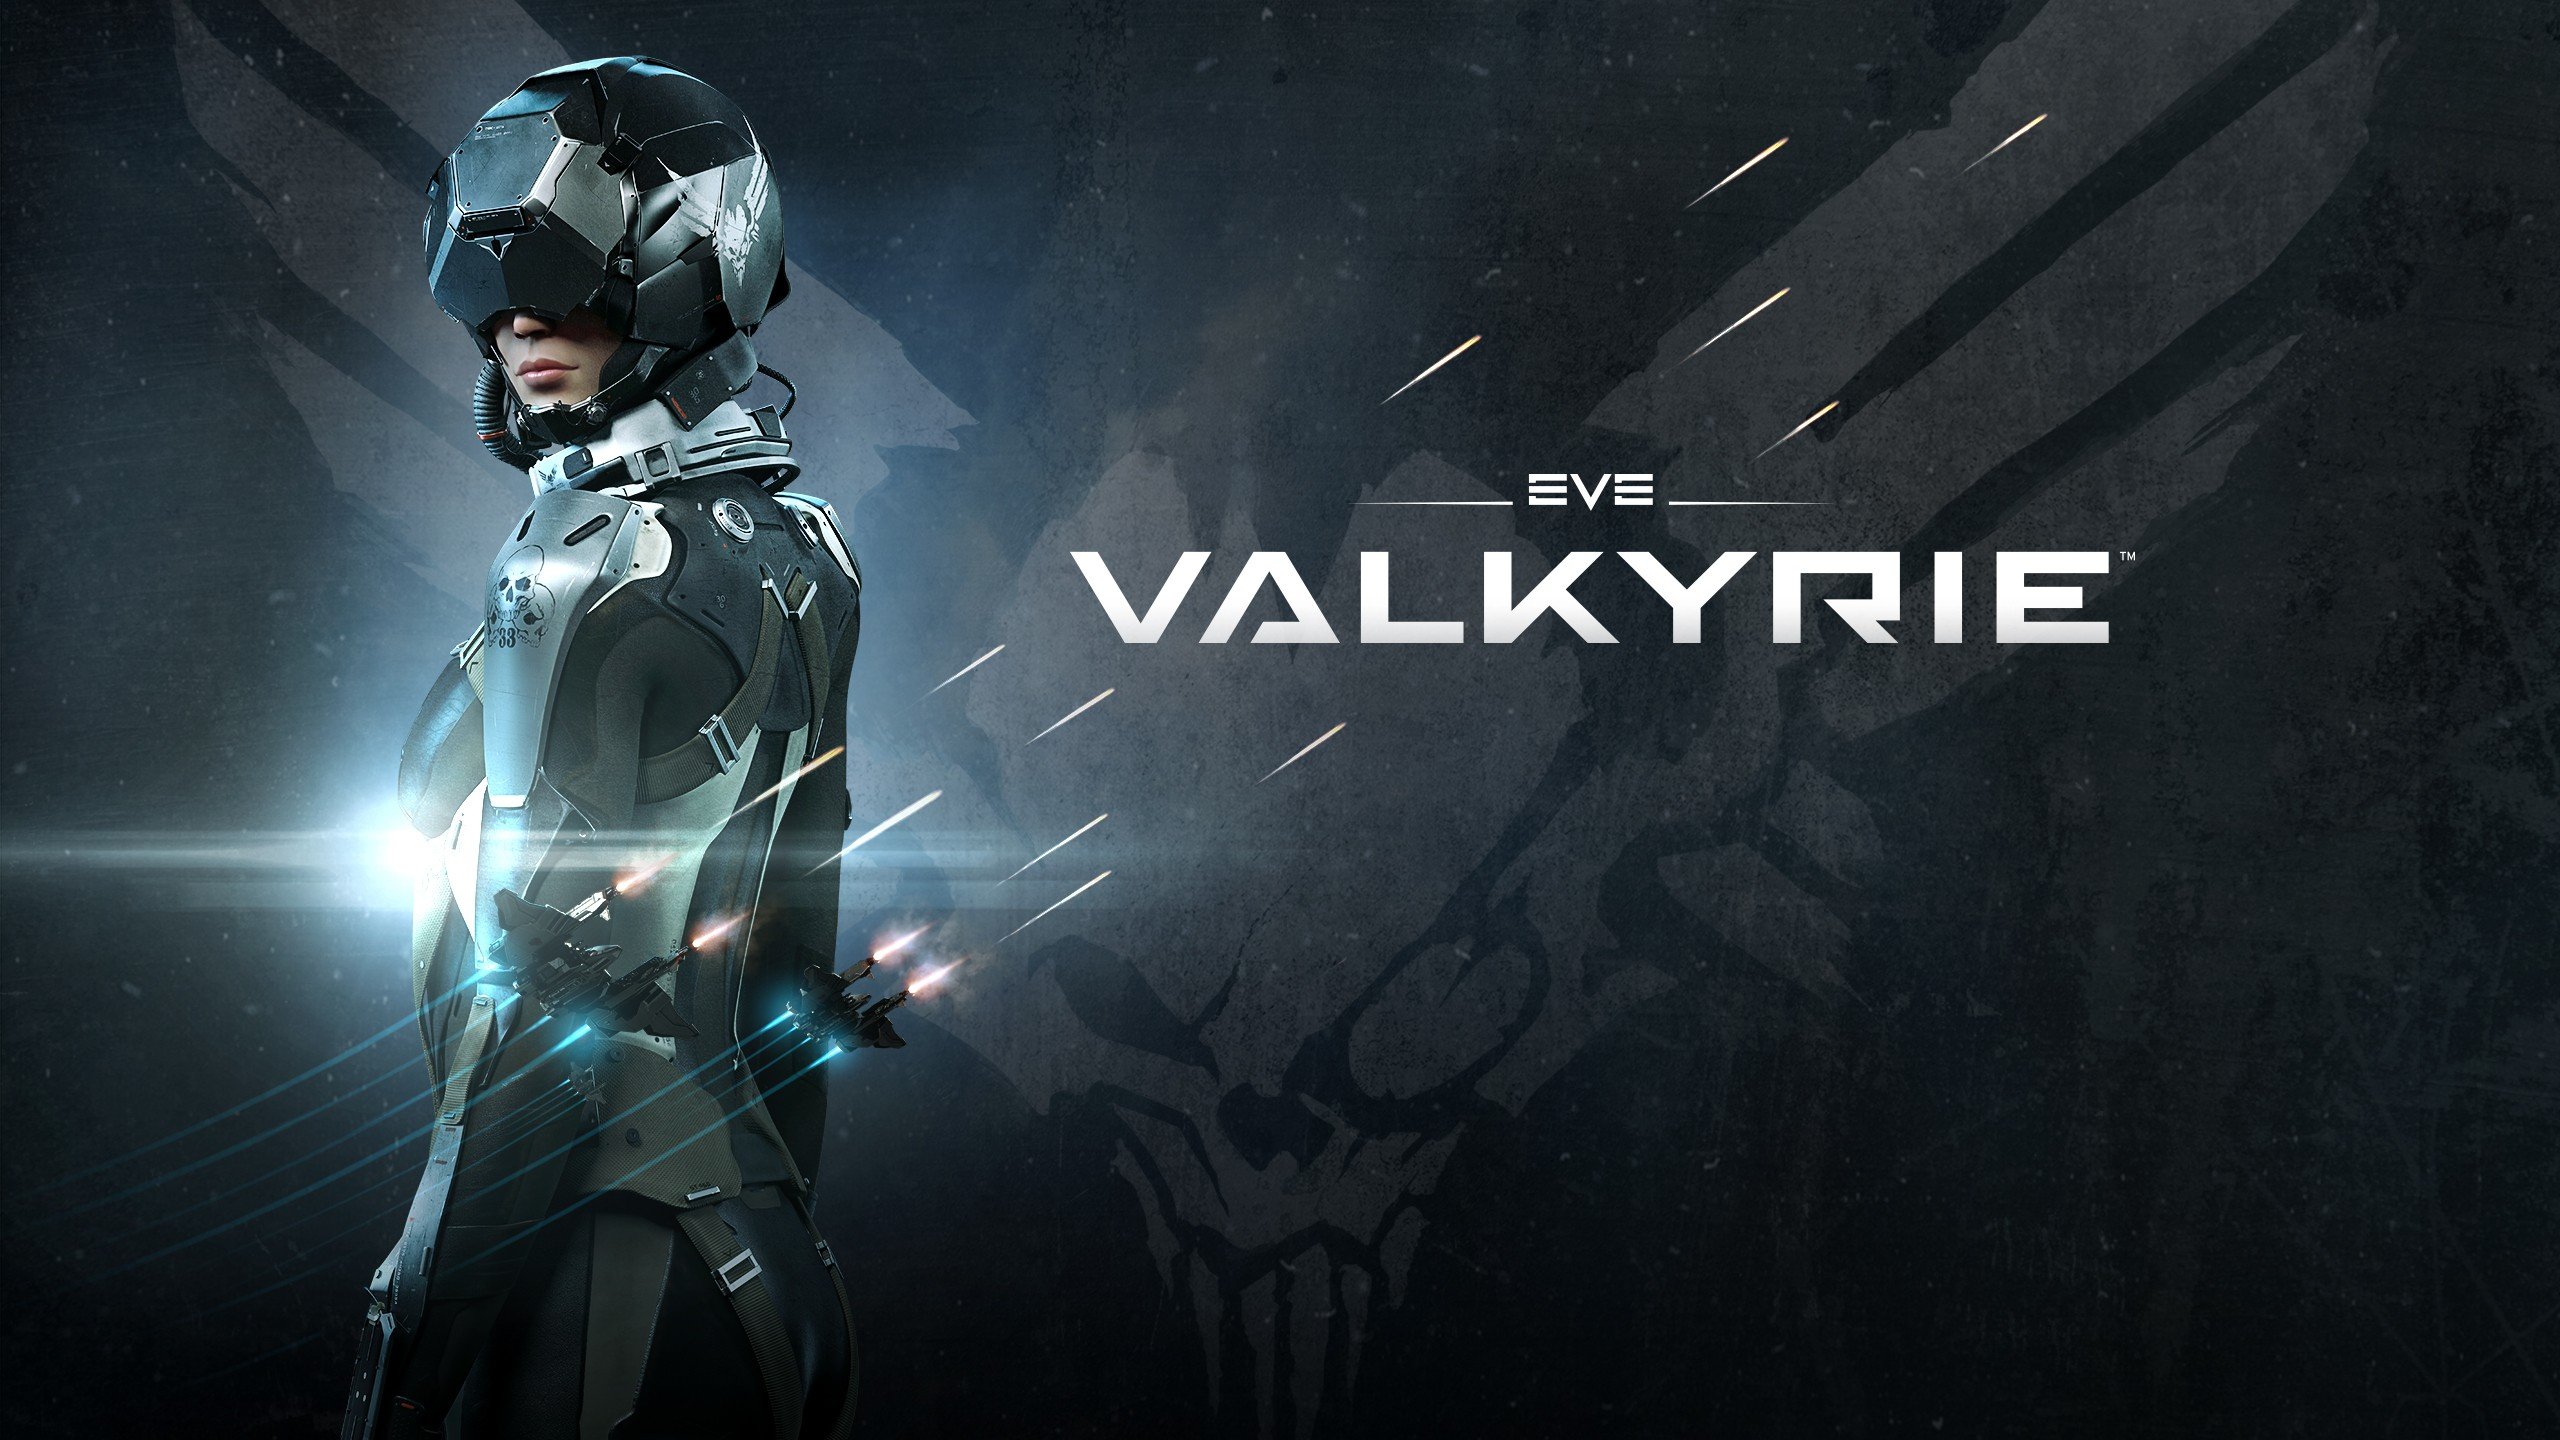 EVE Valkyrie, EVE Online, PC gaming, Virtual reality Wallpaper